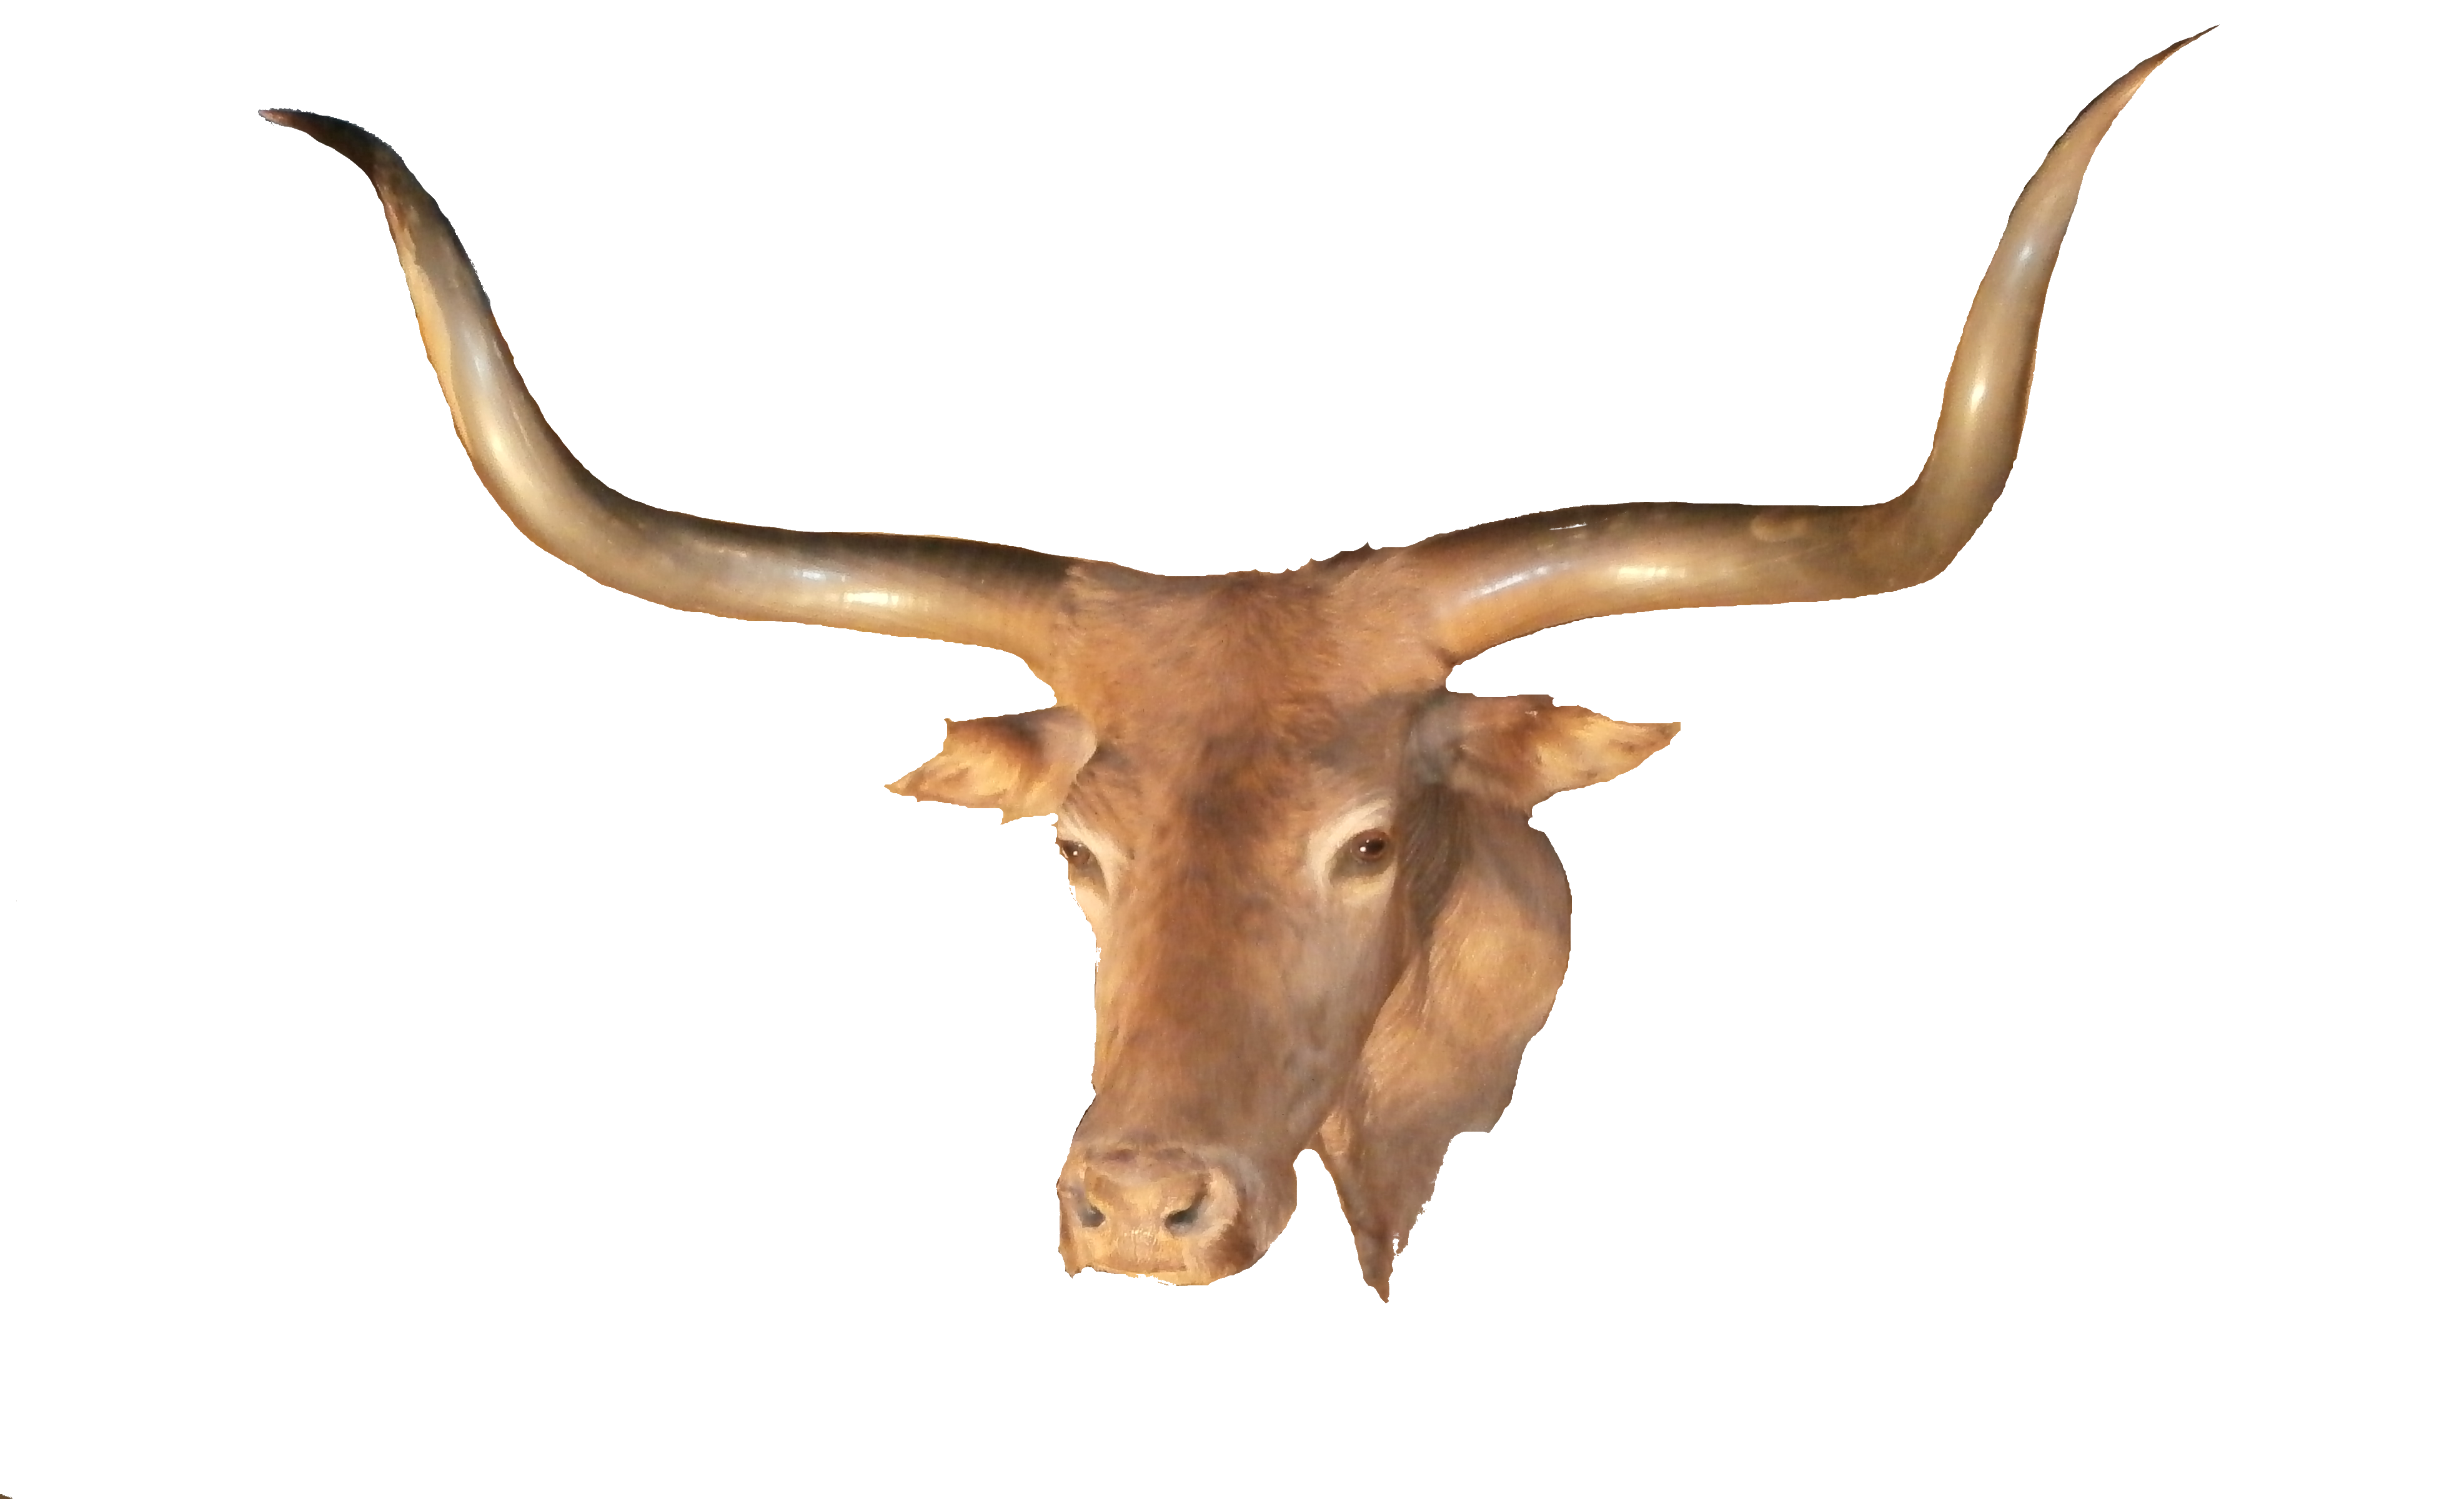 Hd Longhorn PNG Transparent Background, Free Download #36822 - FreeIconsPNG...